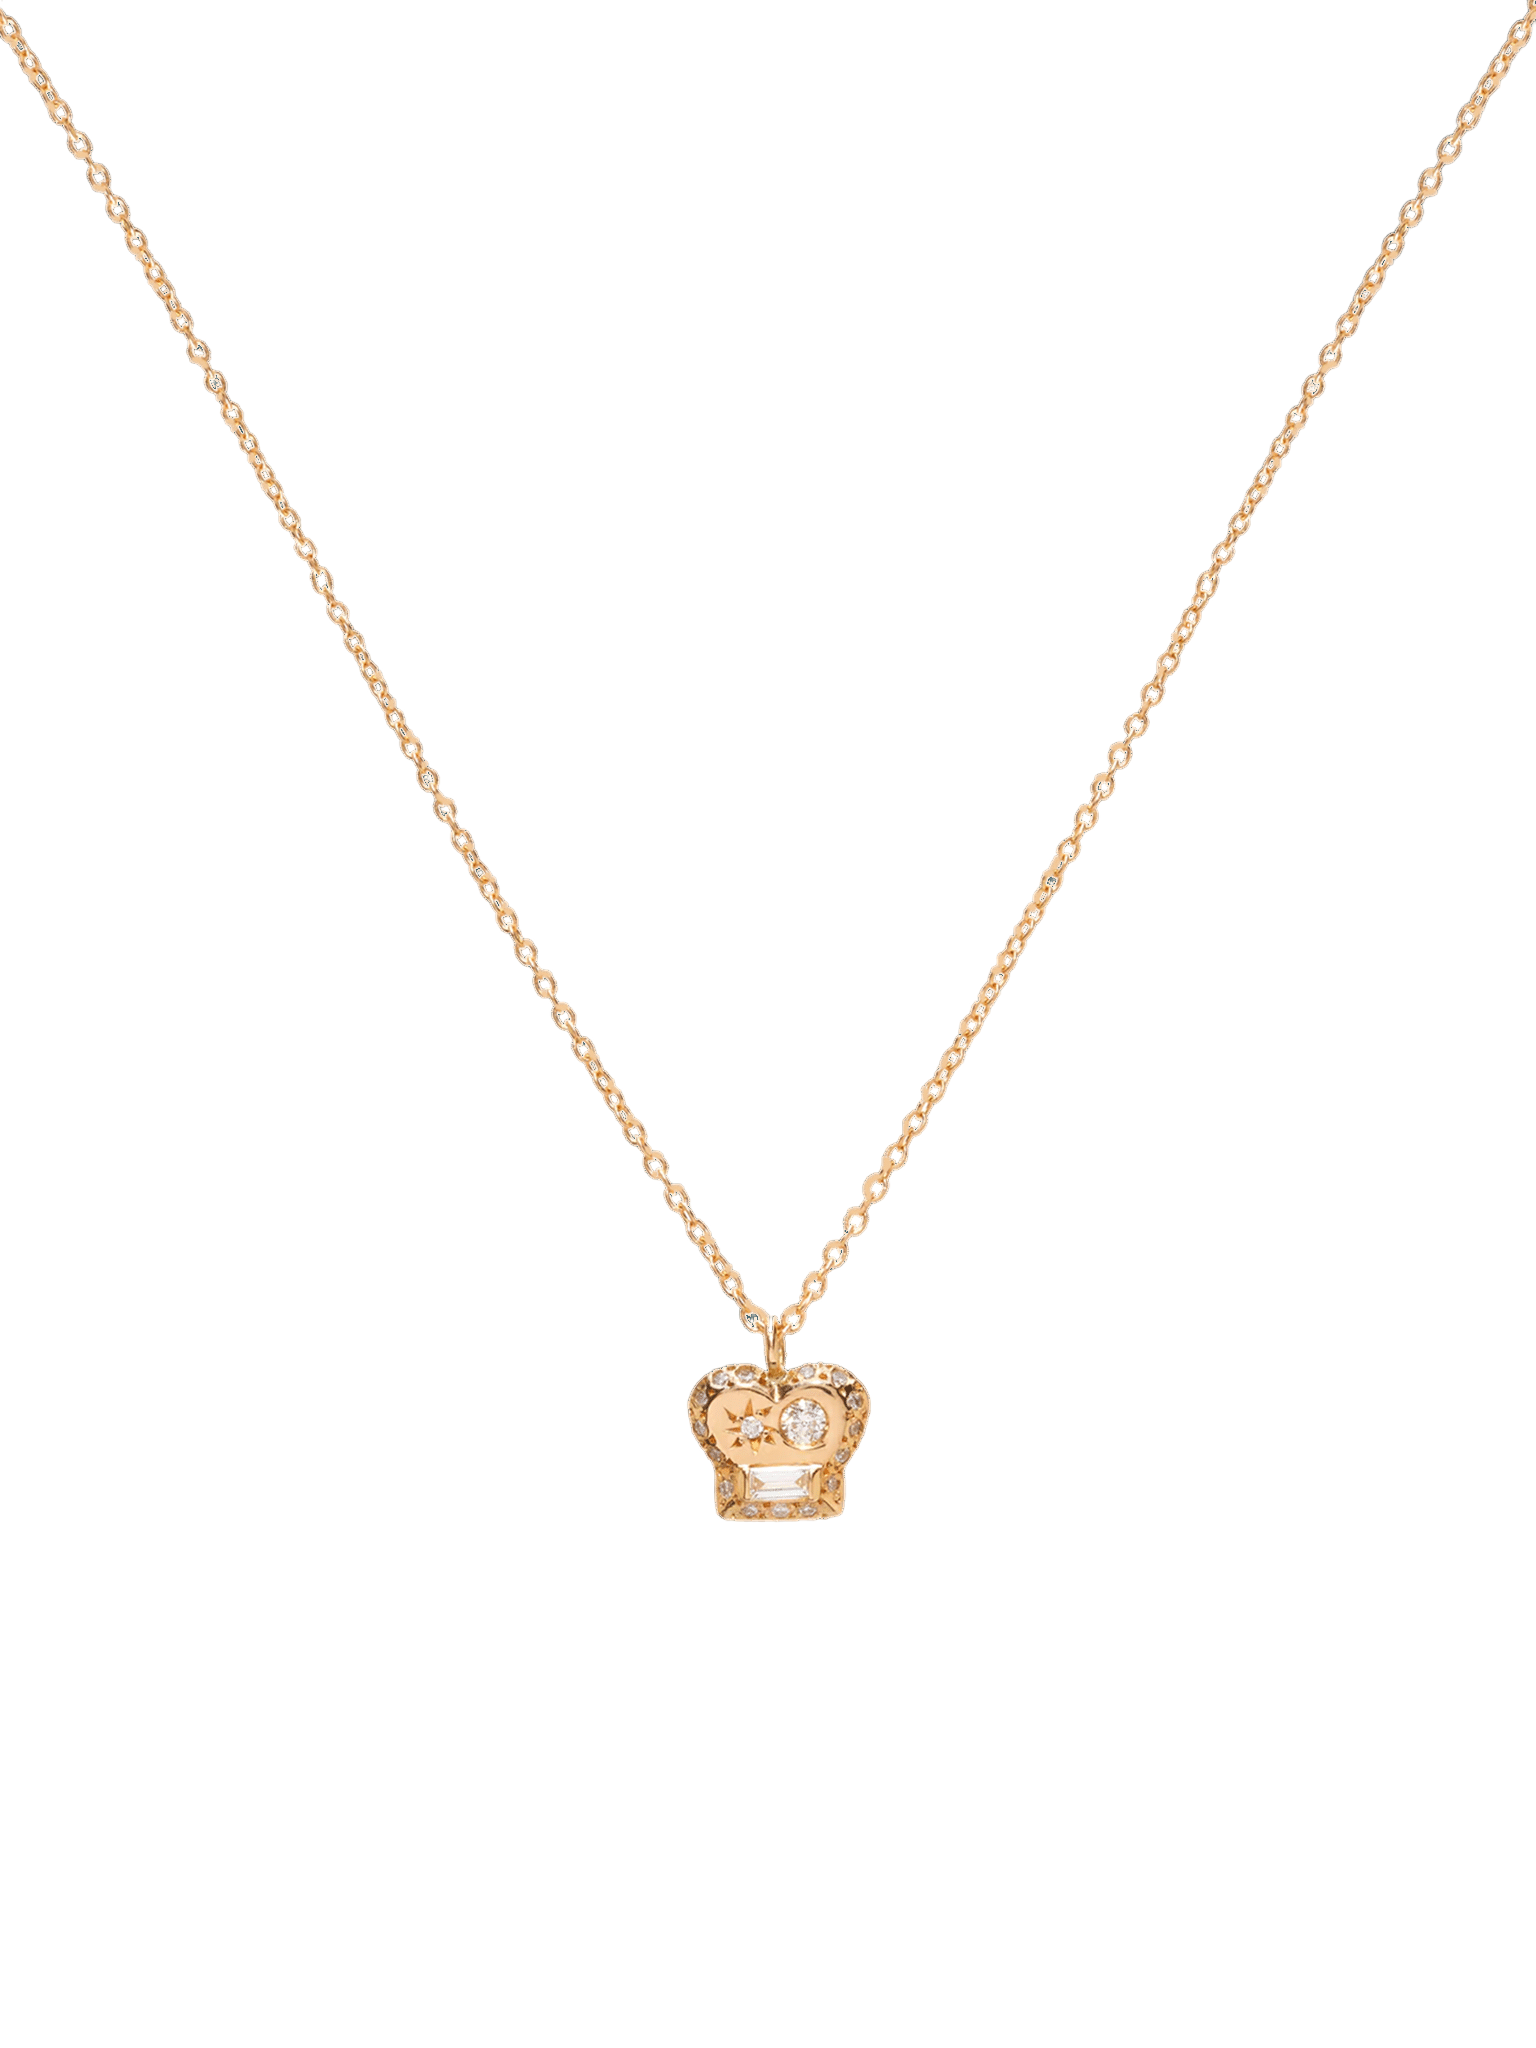 The max necklace with diamonds